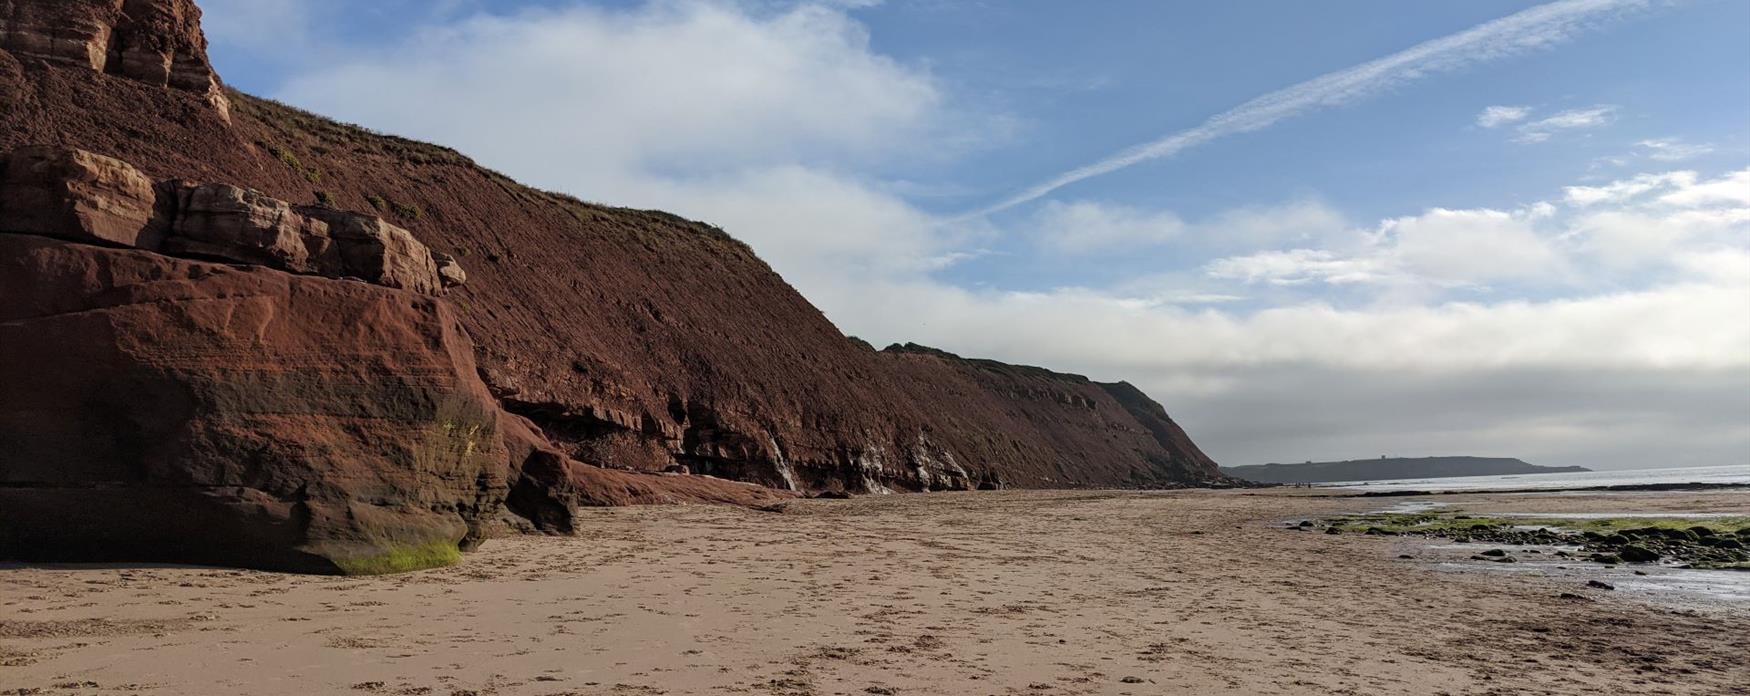 A light sandy beach scene with bright red cliffs on the left. The cliffs have a vibrant red colour with green grass capping them and succulent plants growing intermittently along the cliff. The sea is bright blue and appears slightly on the right side of the image. There are some light white fluffy clouds in the sky over the cliffs.